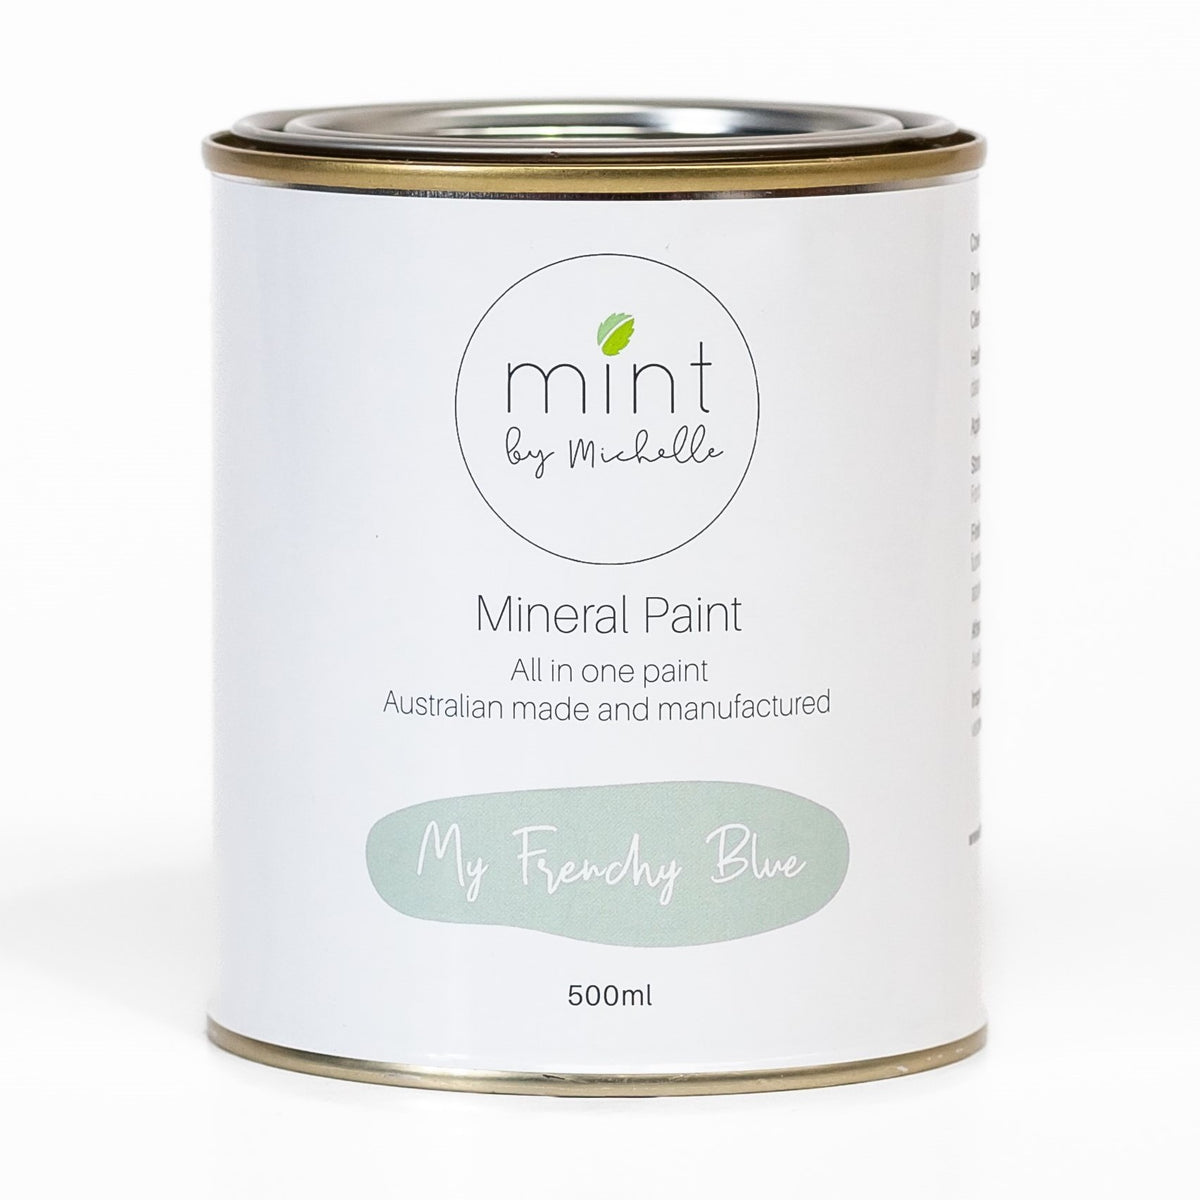 My Frenchy Blue Mint Mineral Paint